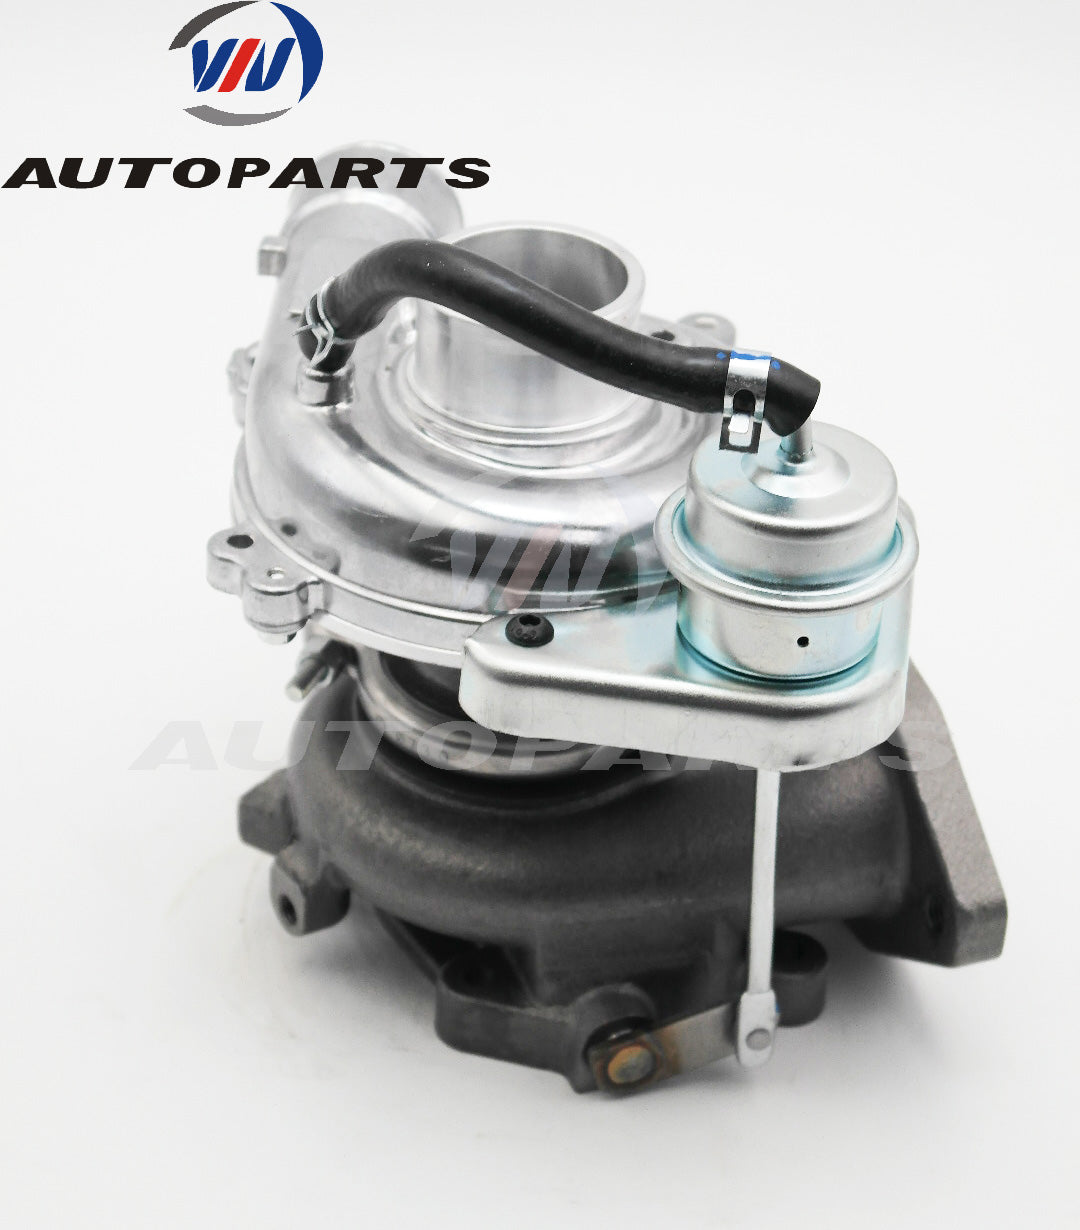 Turbo 17201-0L030 for Toyota Hilux,Land Cruiser,Hiace 2.5L Diesel Engine